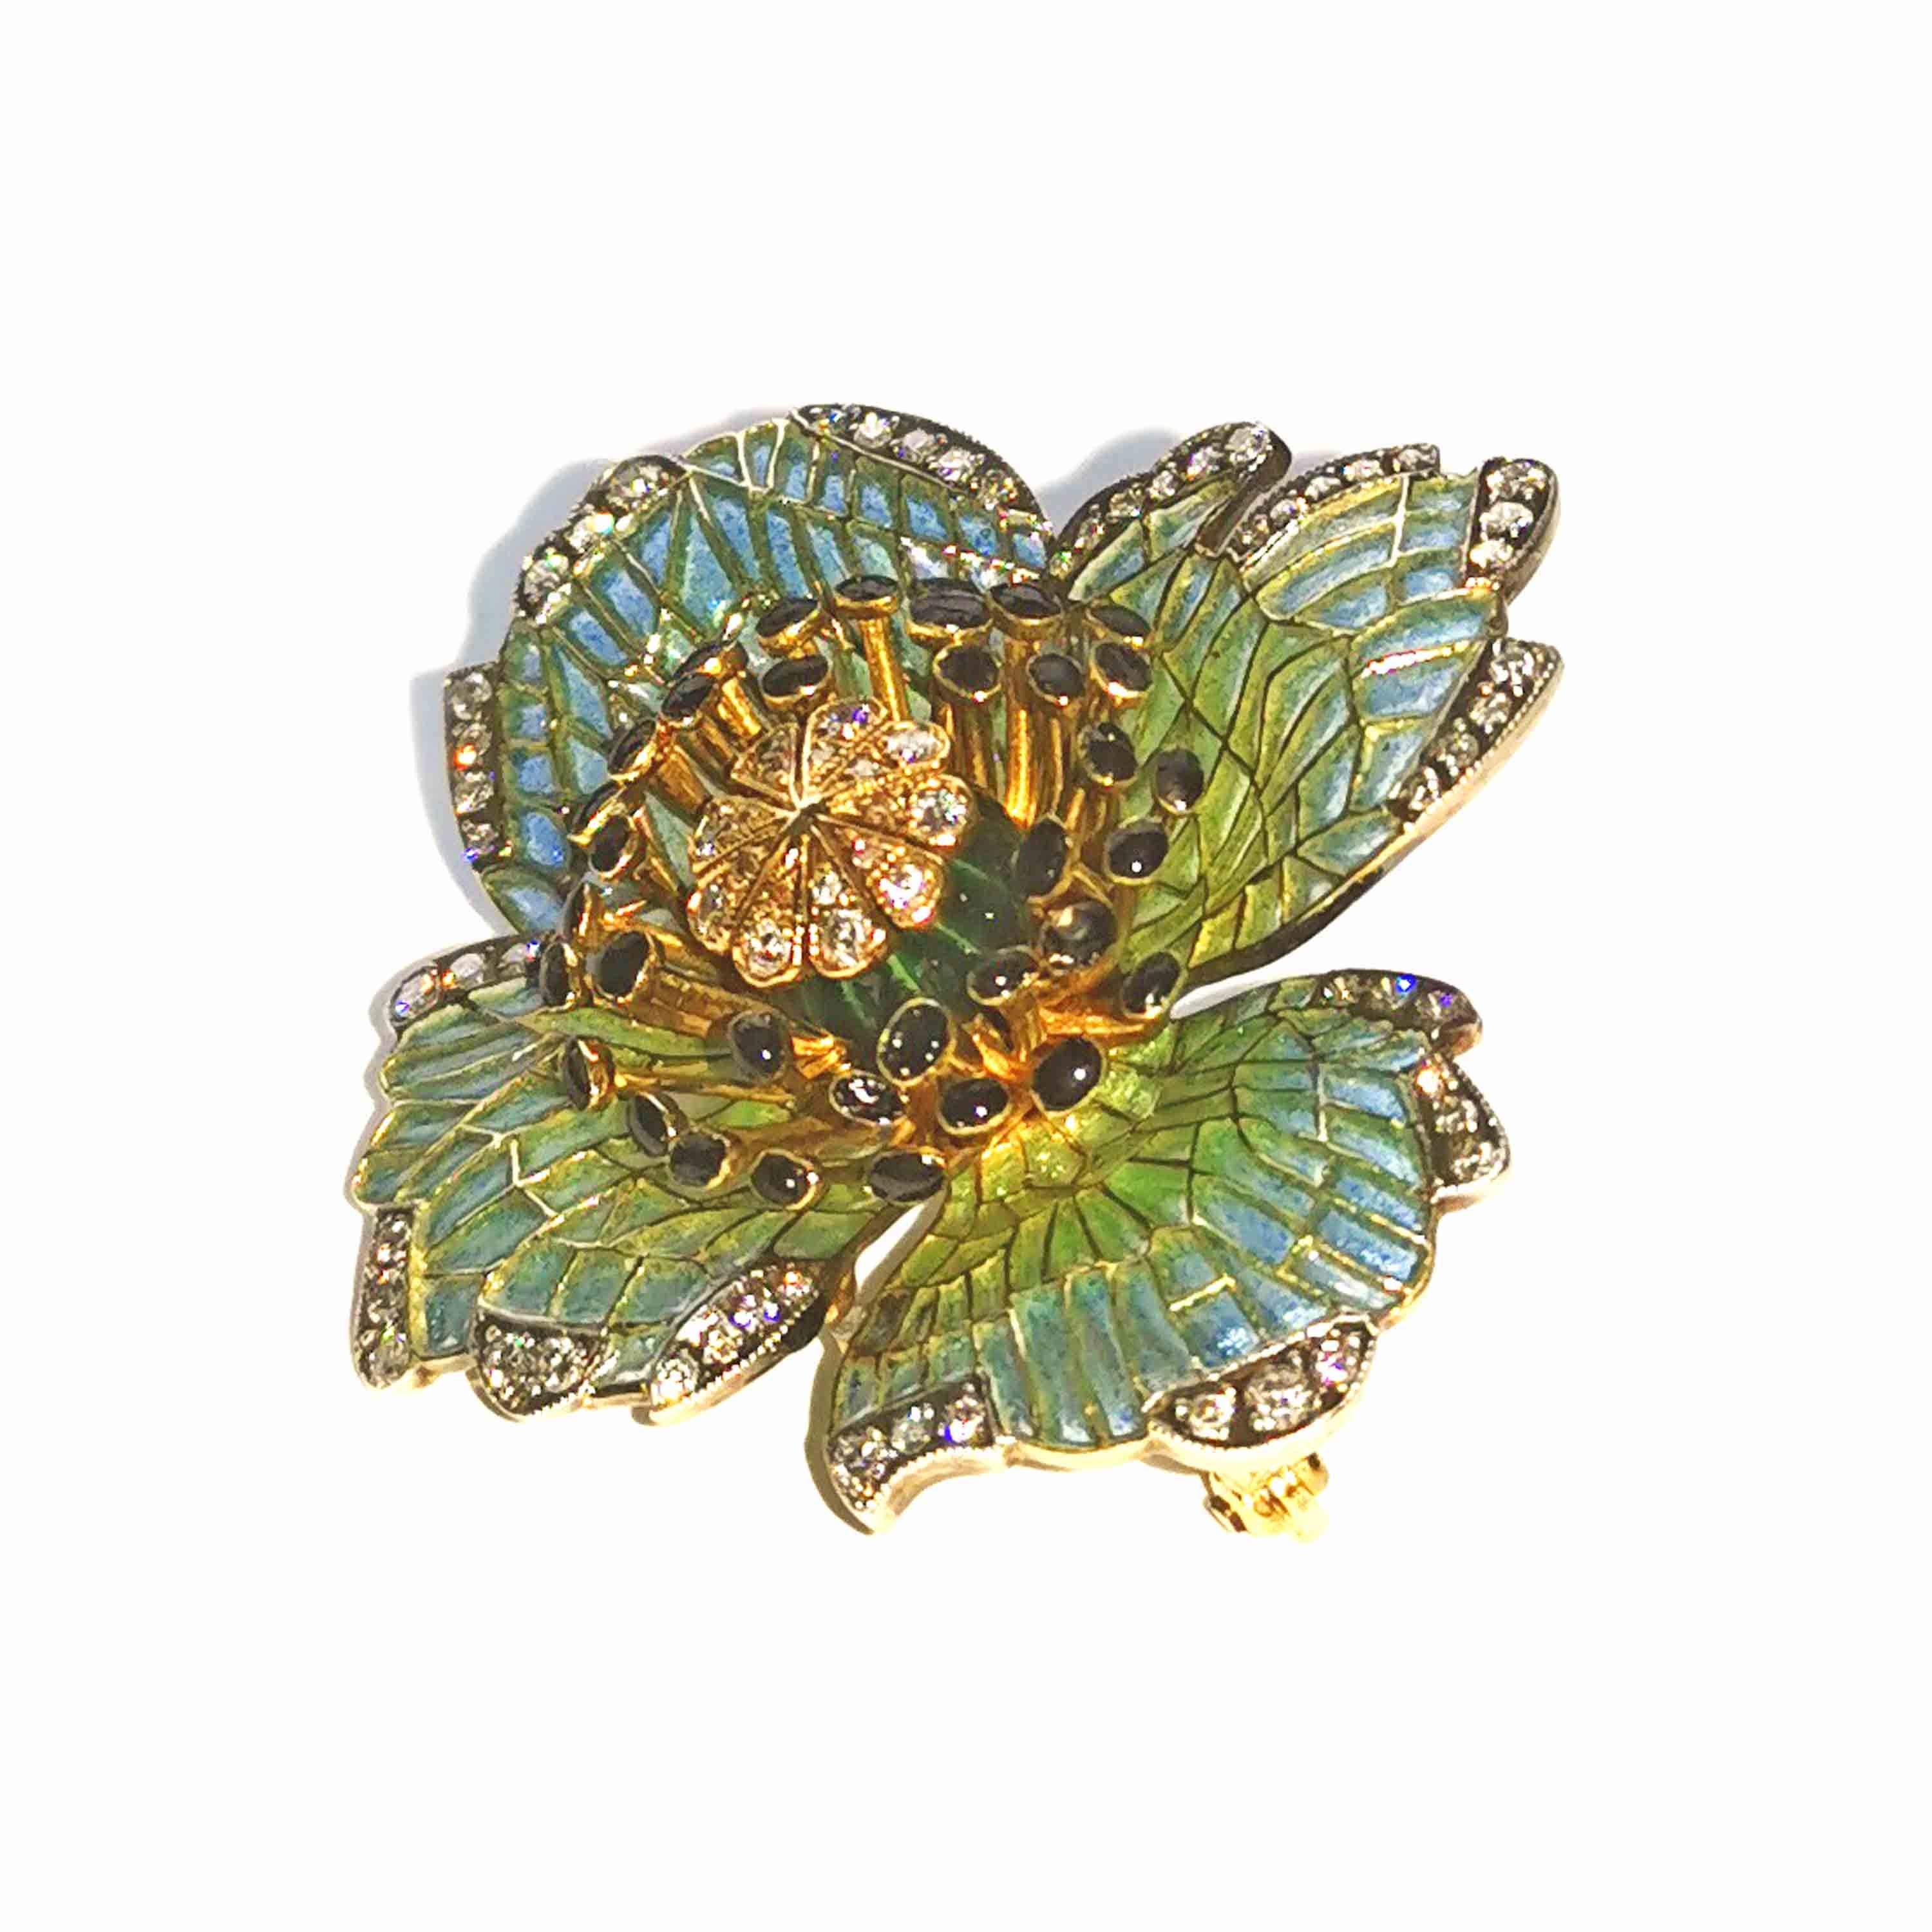 A Moira design poppy brooch, with blue to green plique a jour enamel petals, black enamel stamens, with a green enamelled pistil, set with round brilliant-cut diamonds, mounted in gold, with silver settings, with a roller catch fitting.


Moira’s